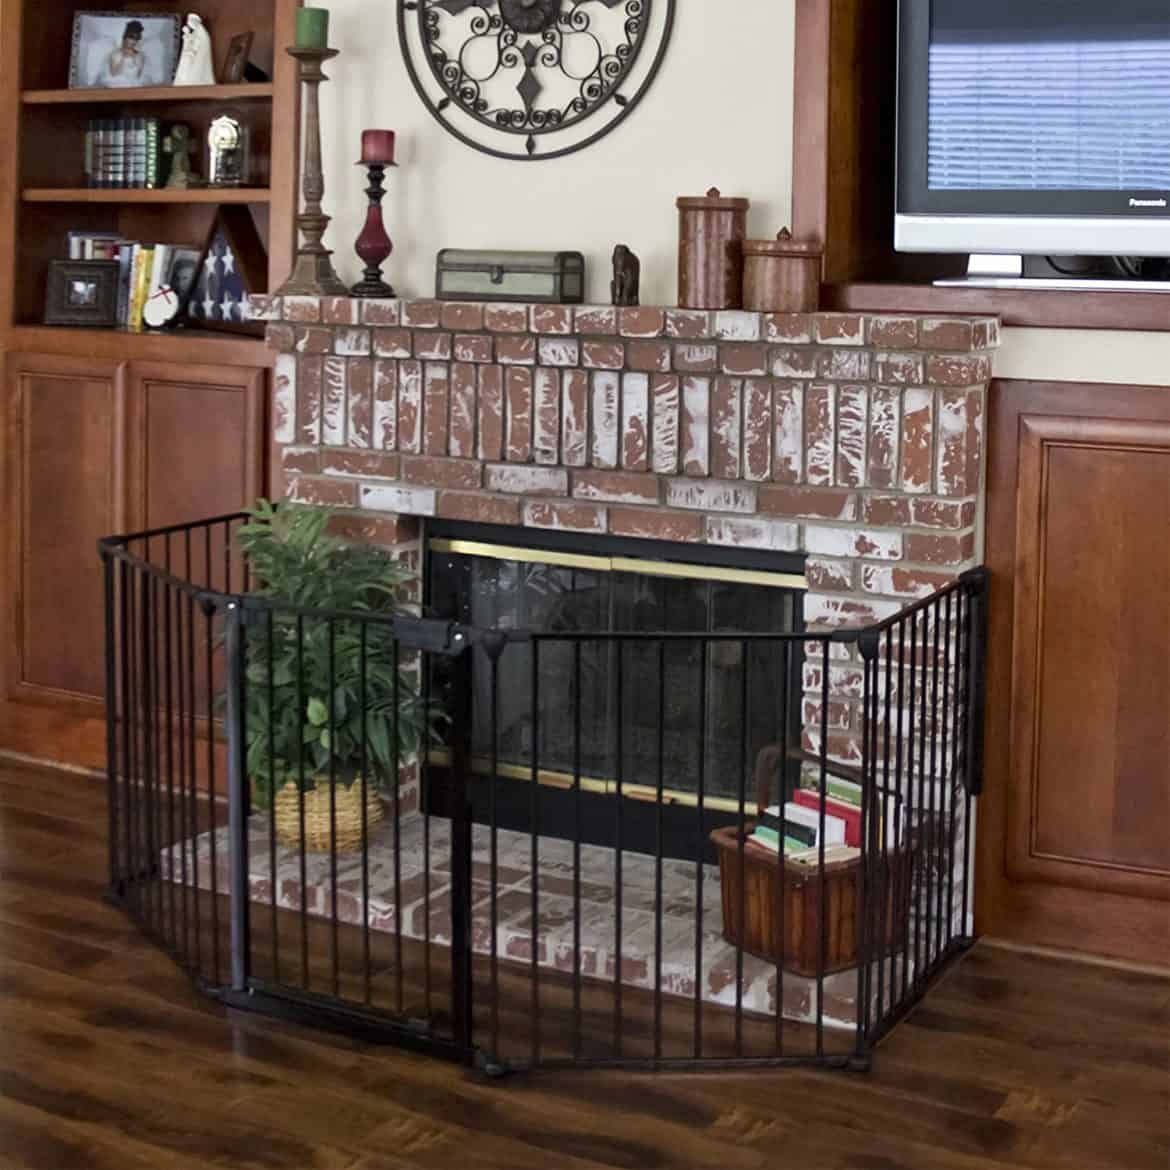 Child Proofing Tips: How to Baby Proof a Fireplace.